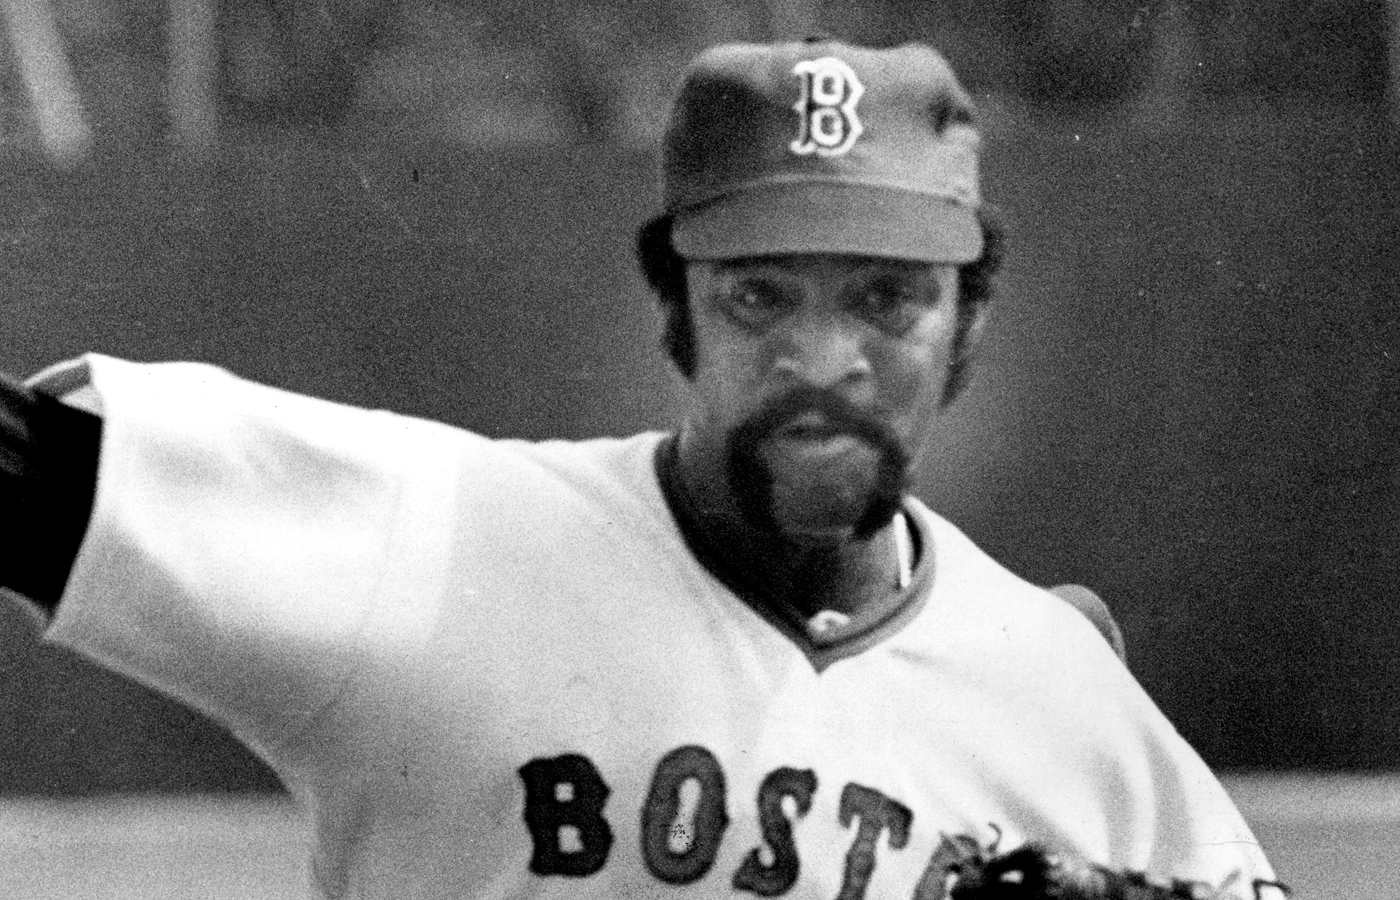 1977 Red Sox season ended in frustration - The Boston Globe